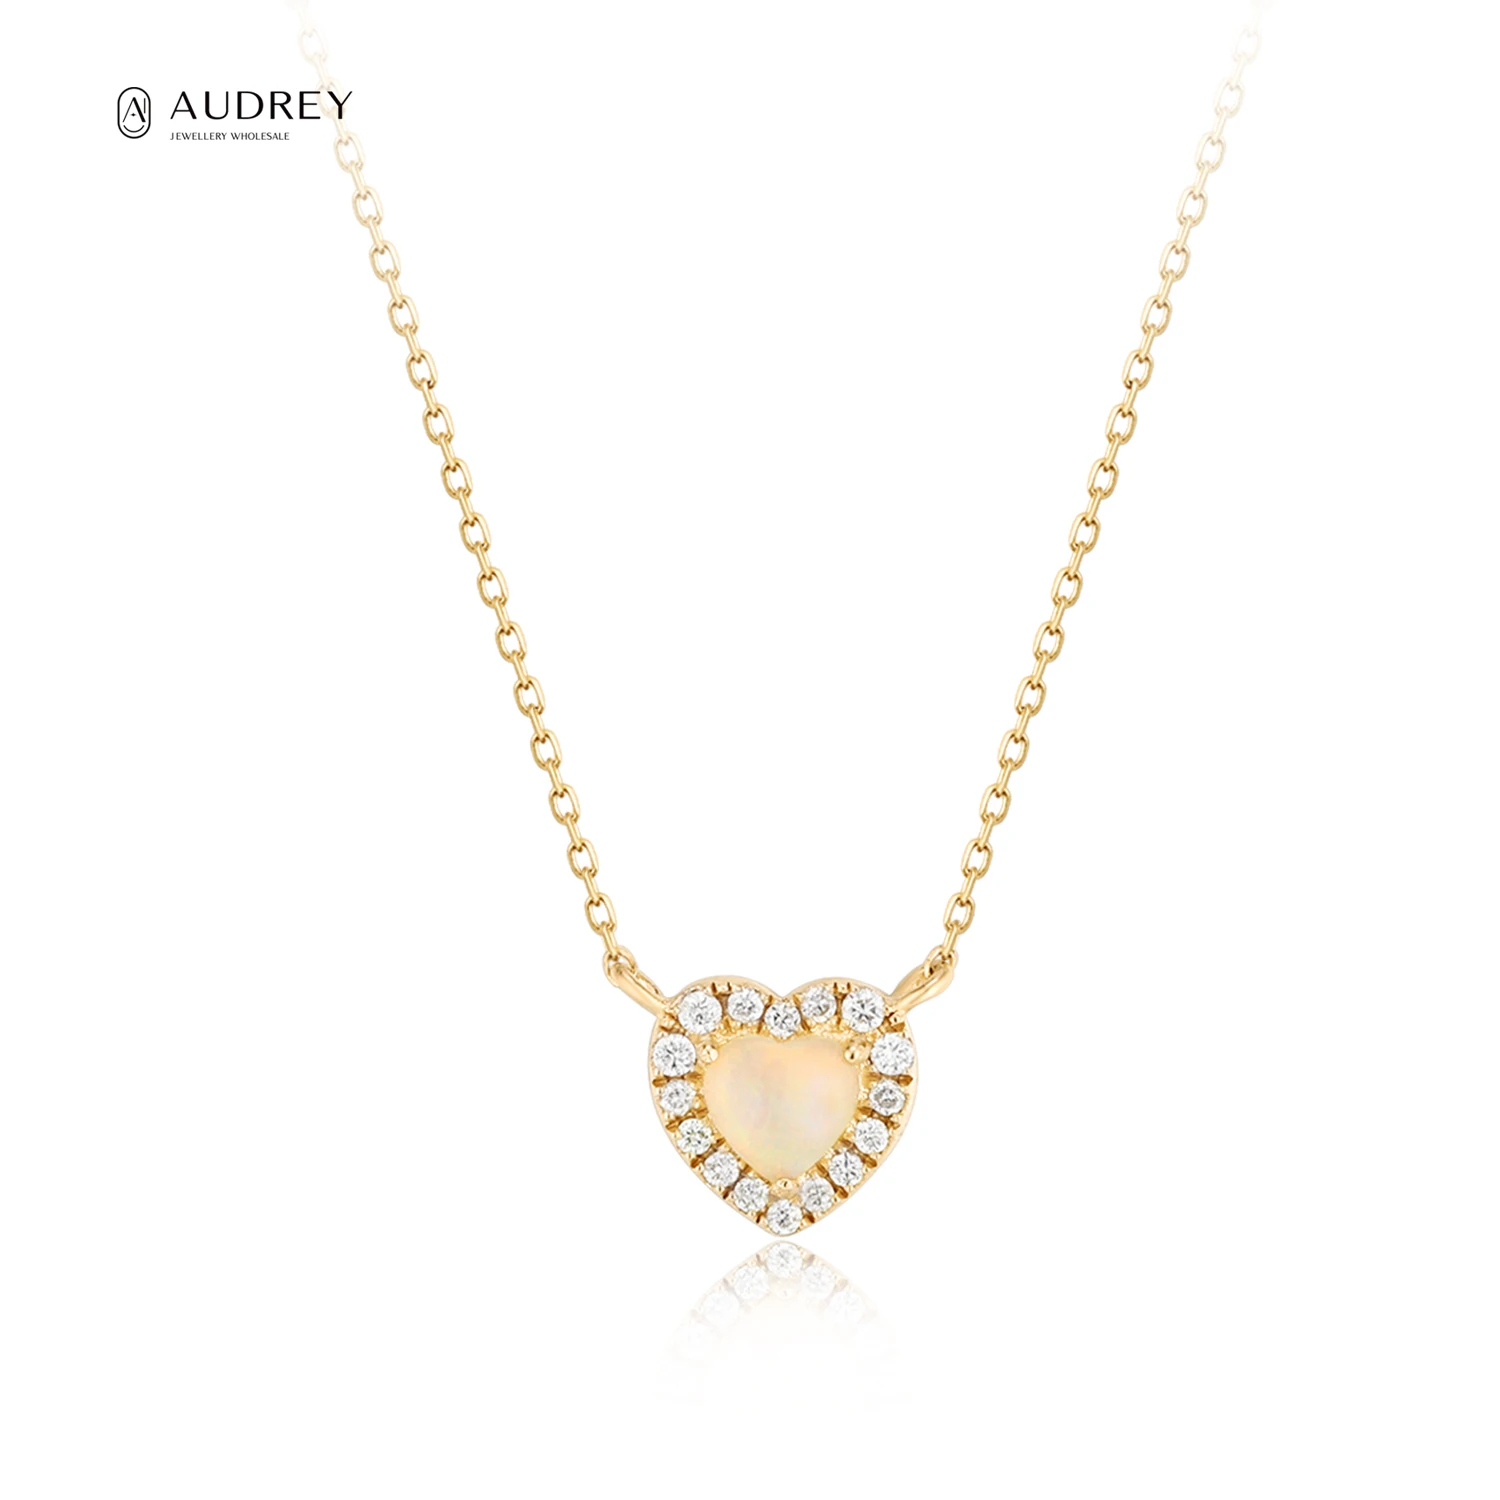 

Audrey Luxury Diamond Jewelry Opal Stone Necklace 14K Solid Gold Necklace Forever Love Heart Pendant Necklaces For Women